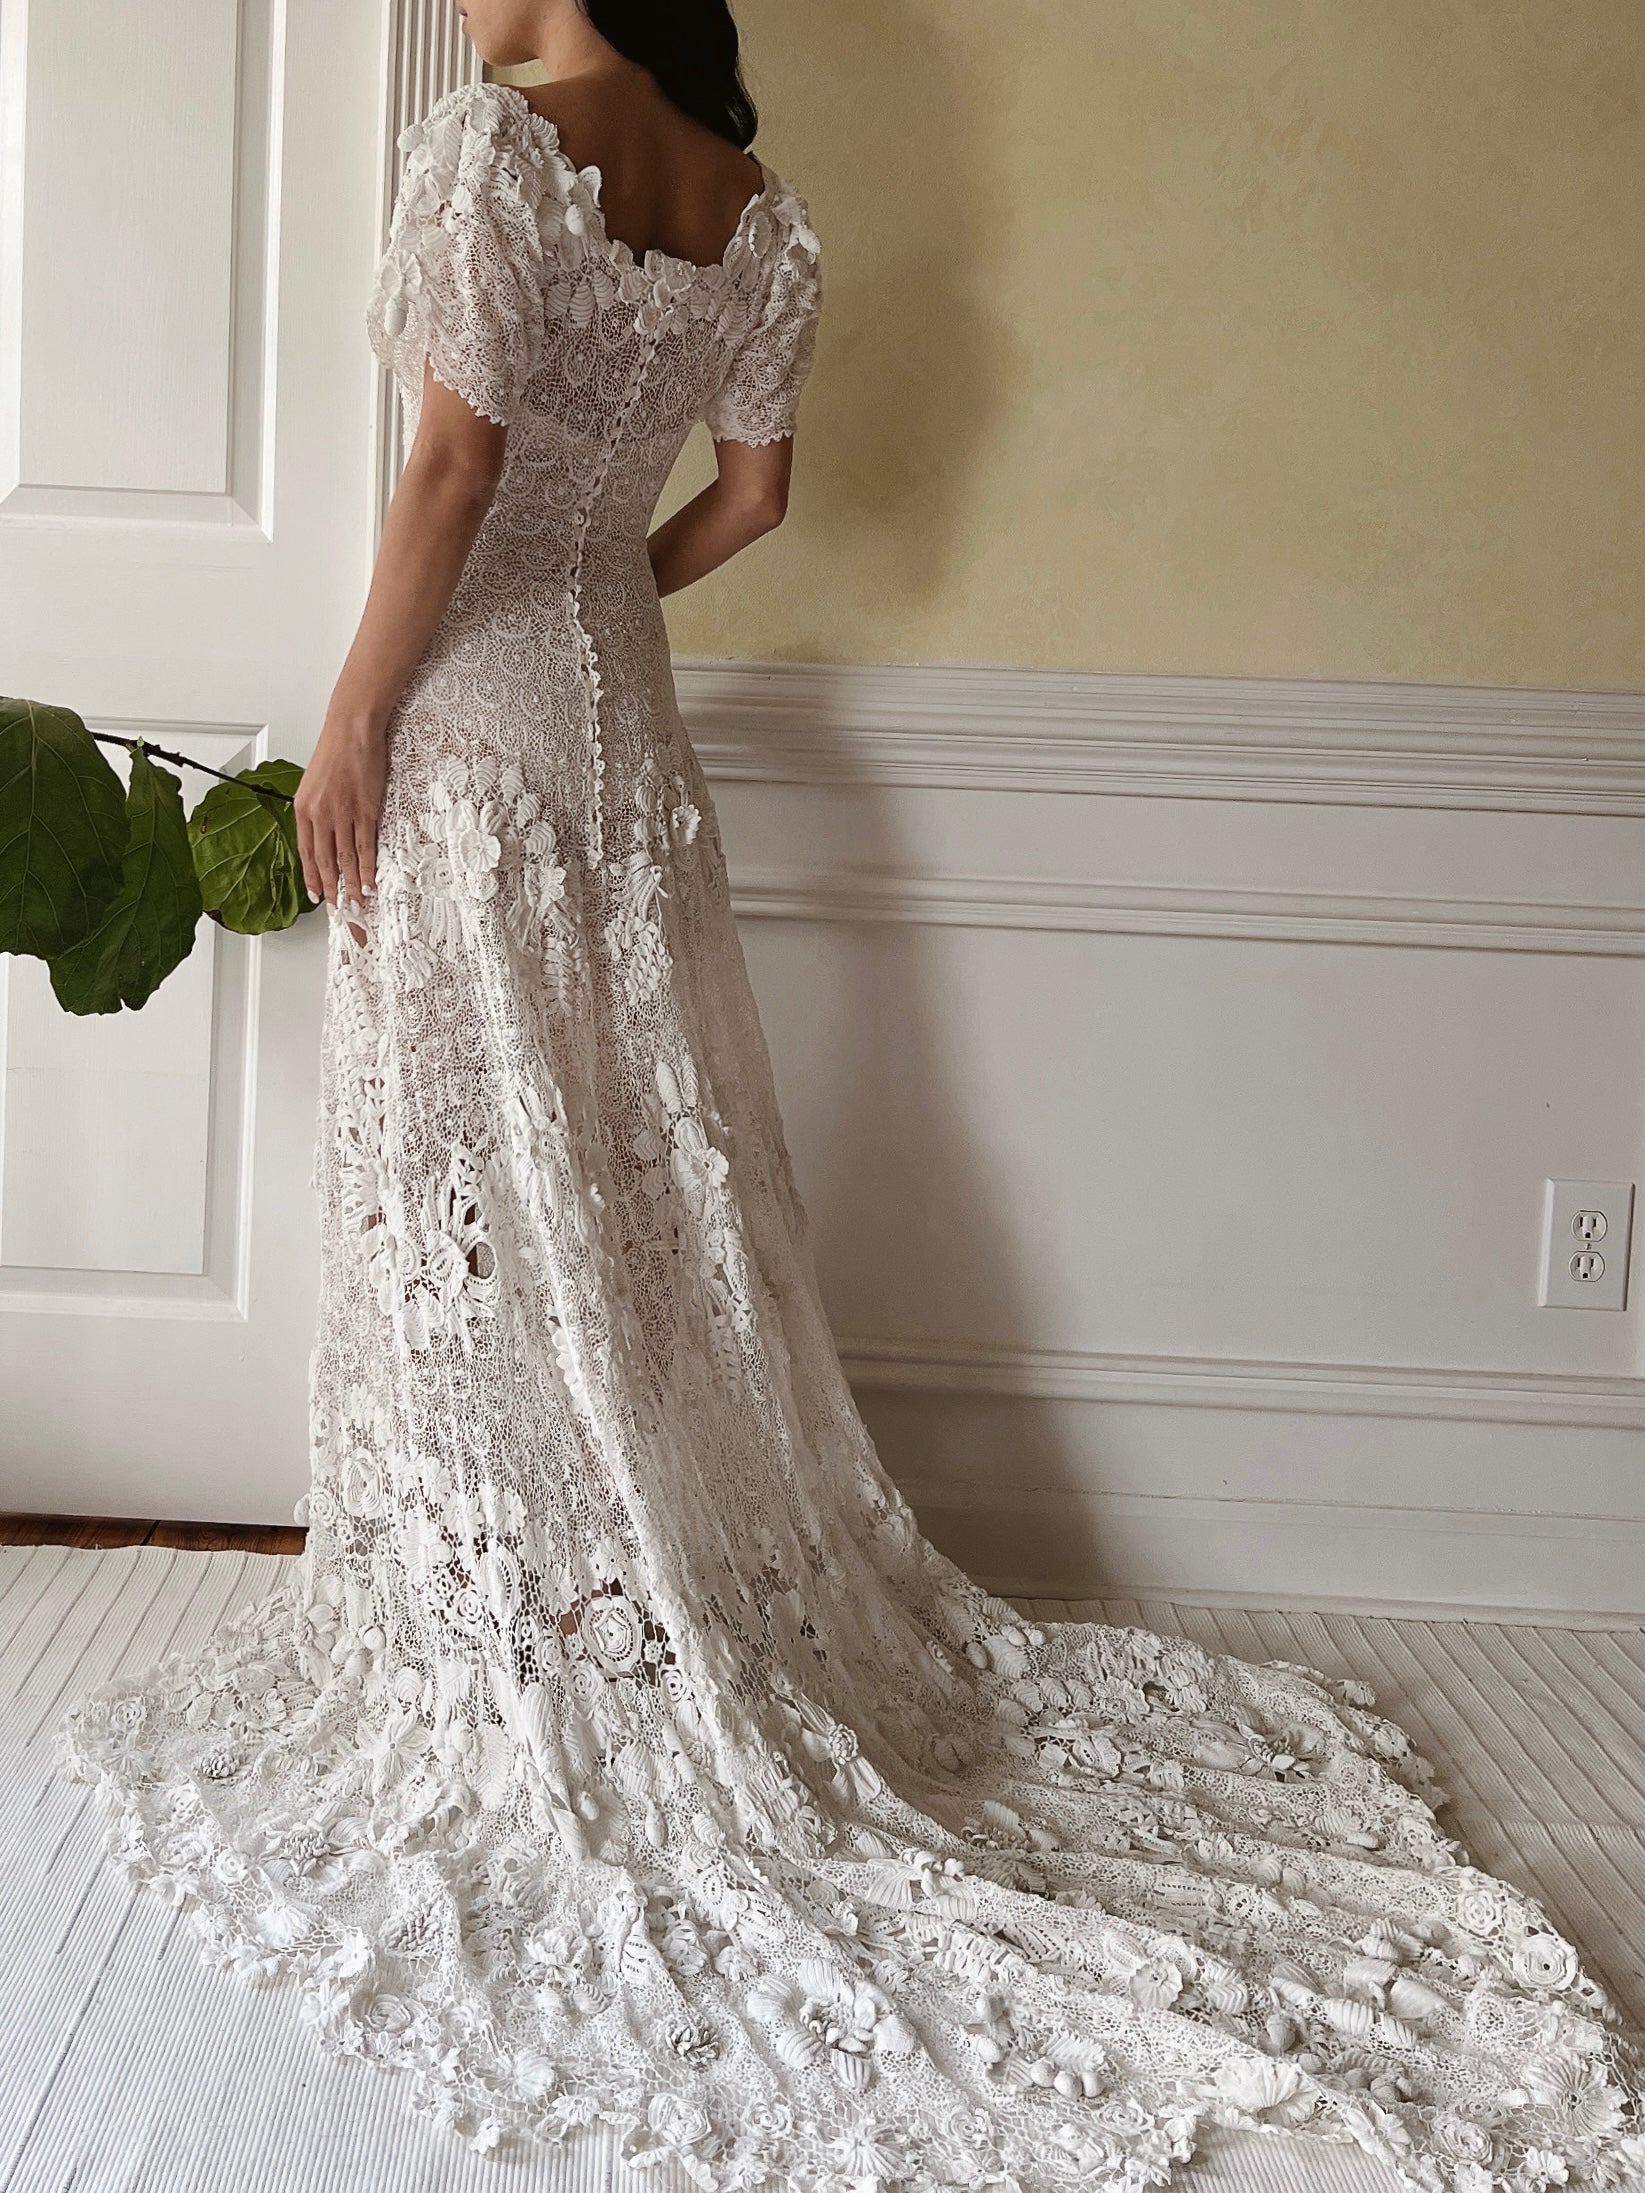 One-of-a-Kind Antique Irish Lace Trained Gown - XS